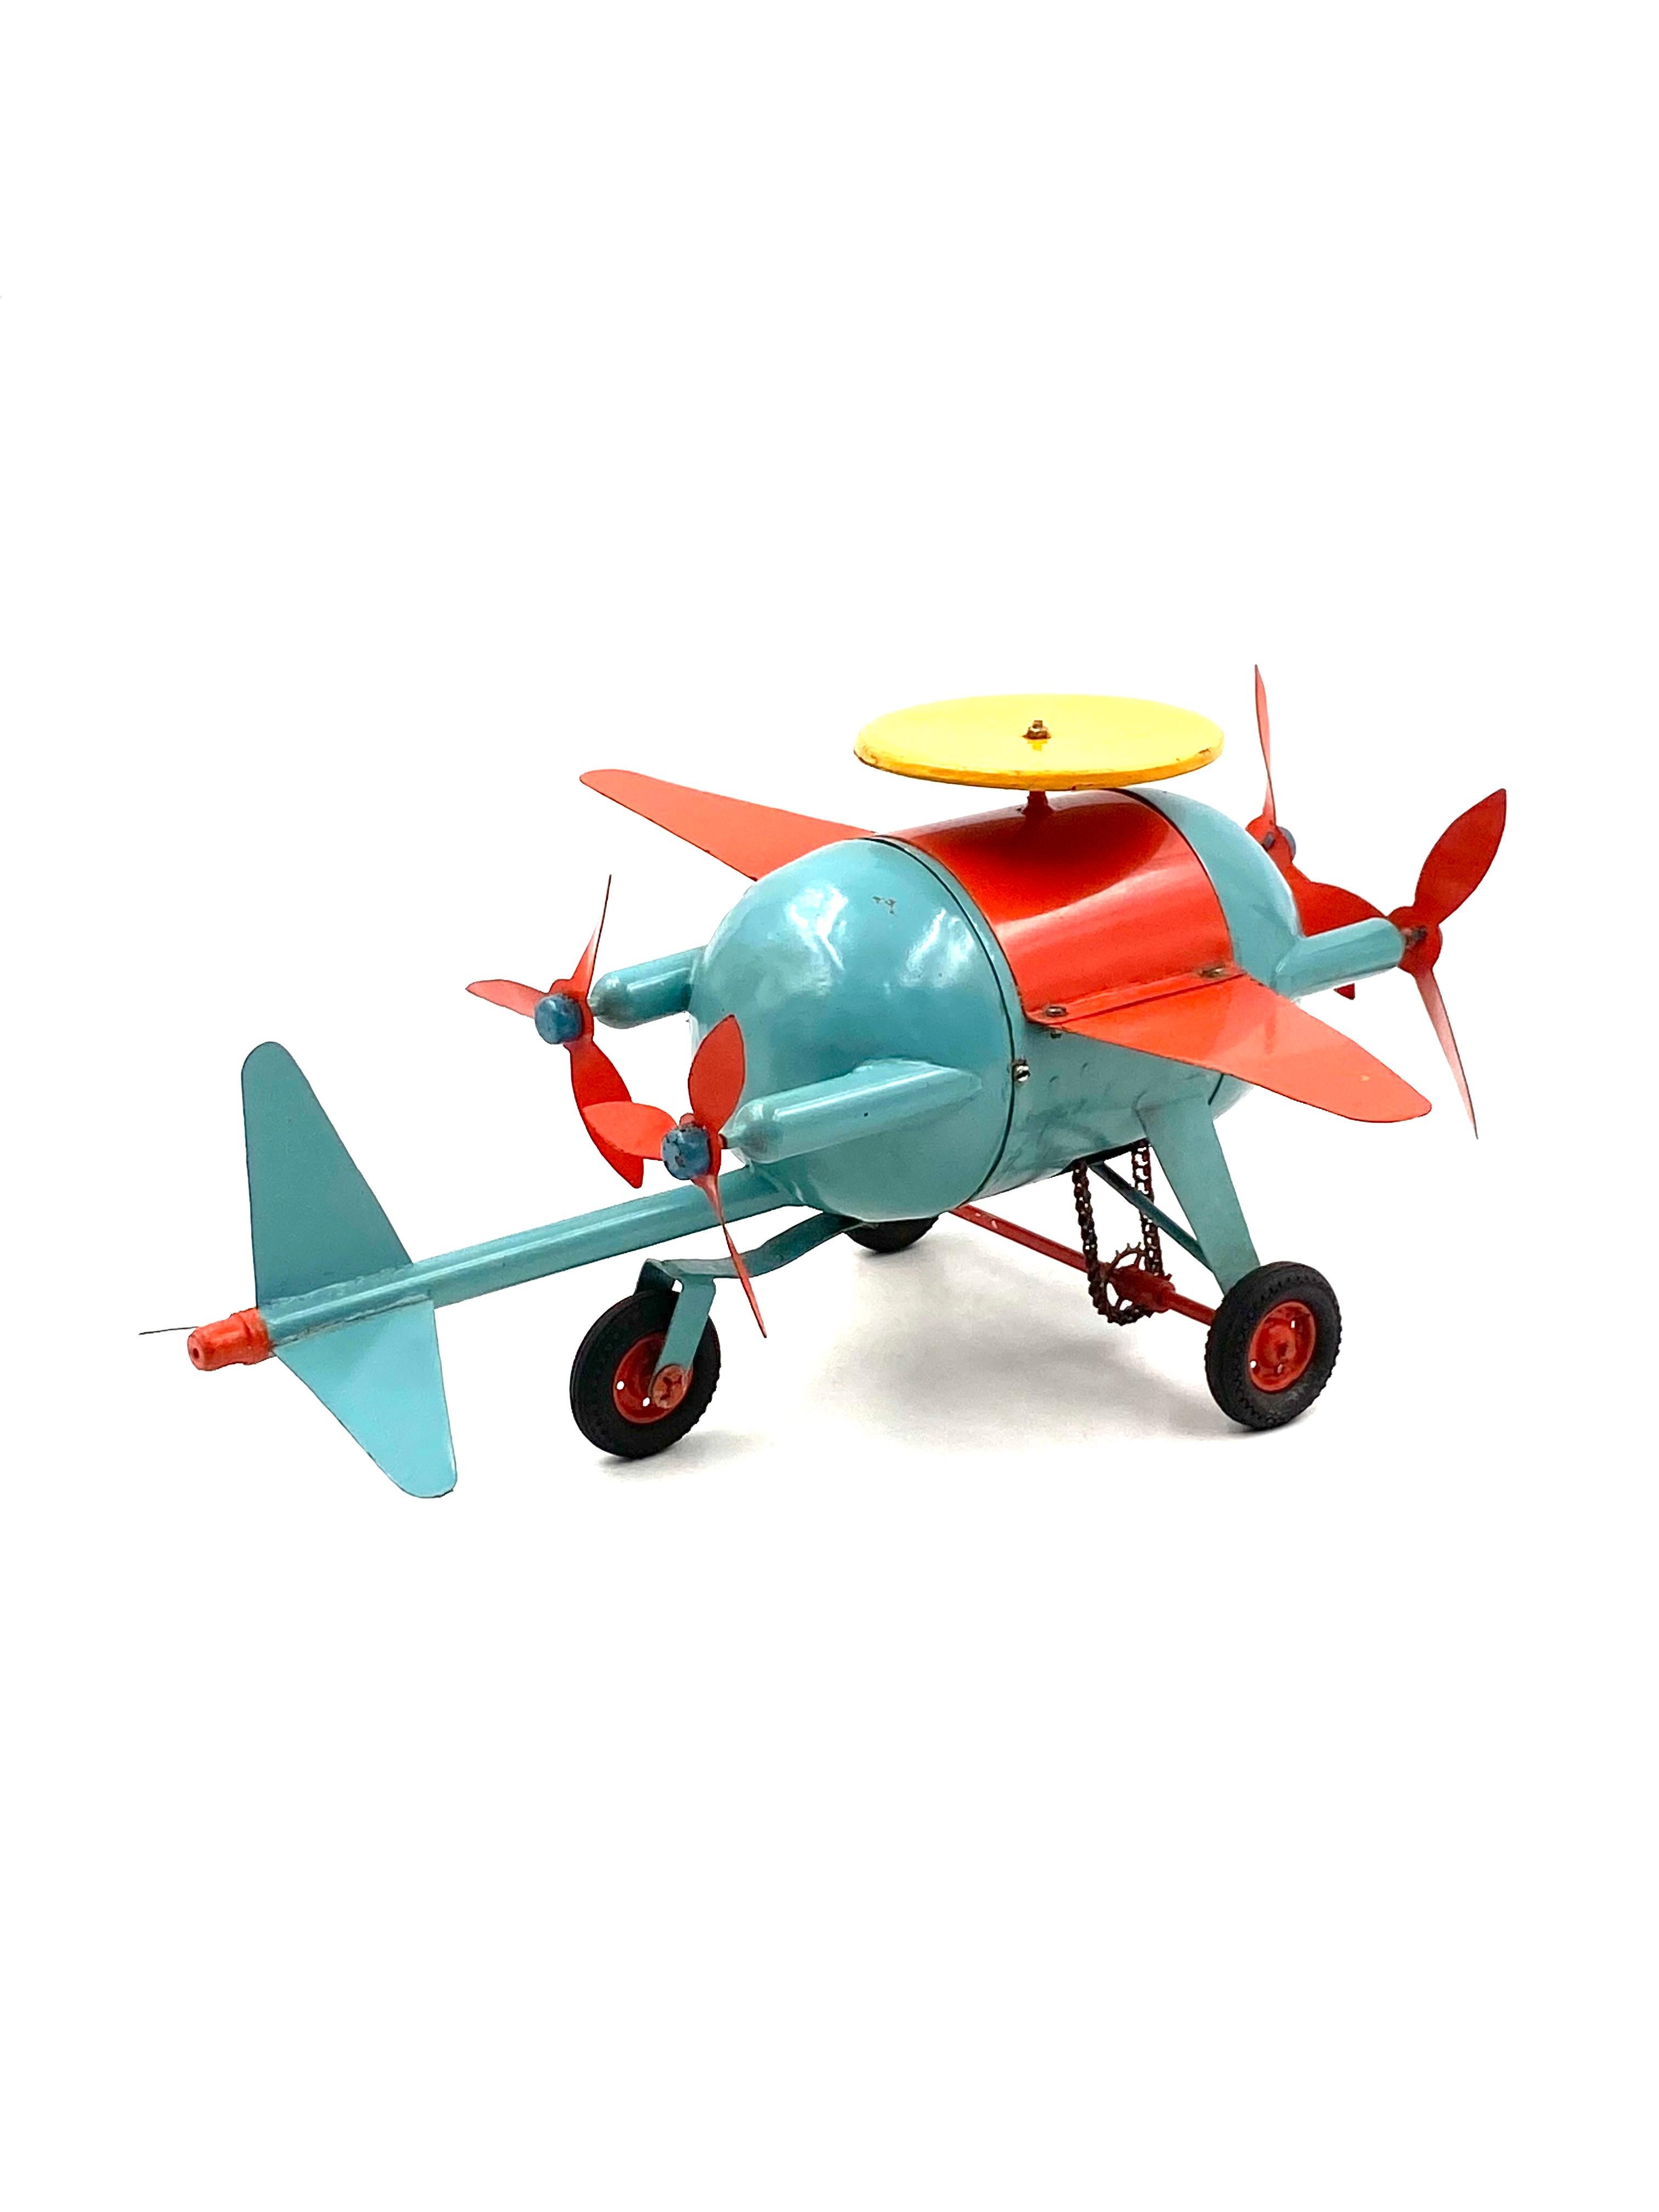 Red and blue airplane toy, France early 20th century For Sale 4